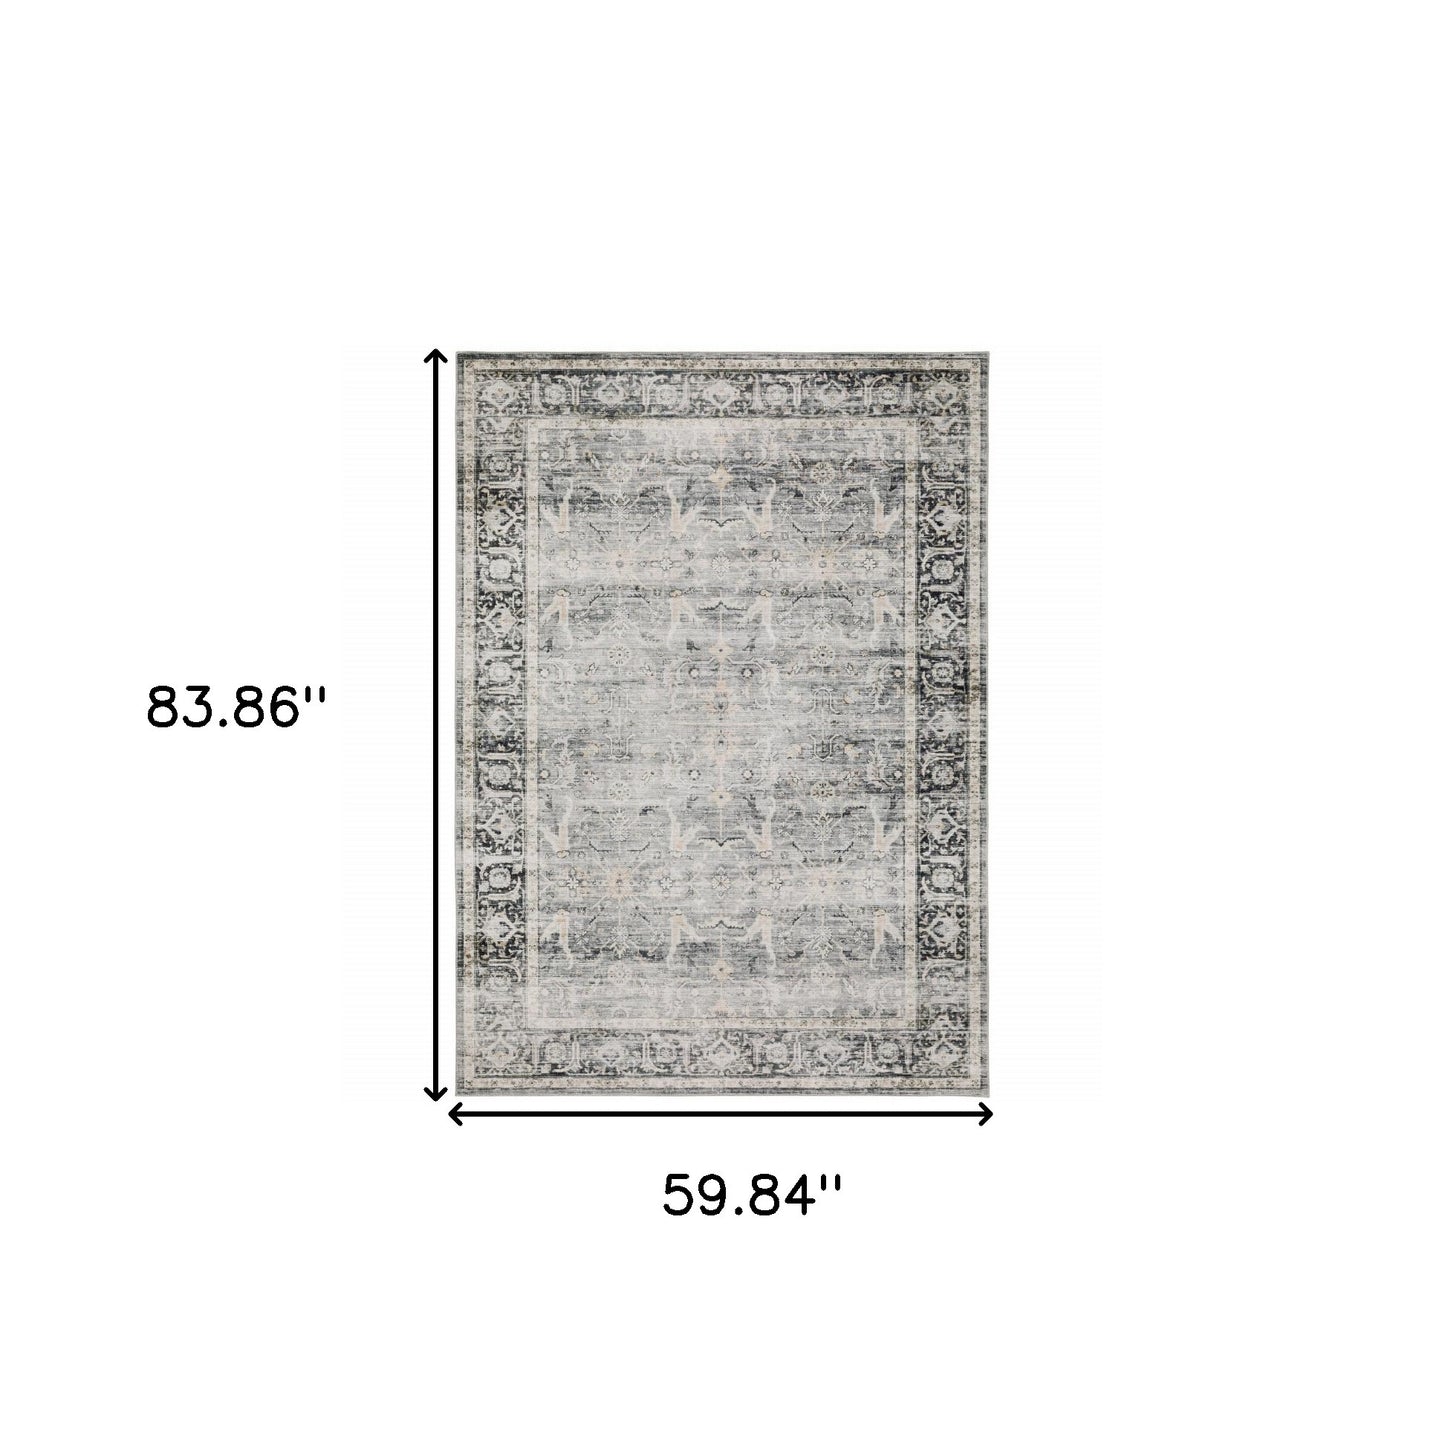 5' X 7' Charcoal Grey Salmon And Ivory Oriental Printed Stain Resistant Non Skid Area Rug